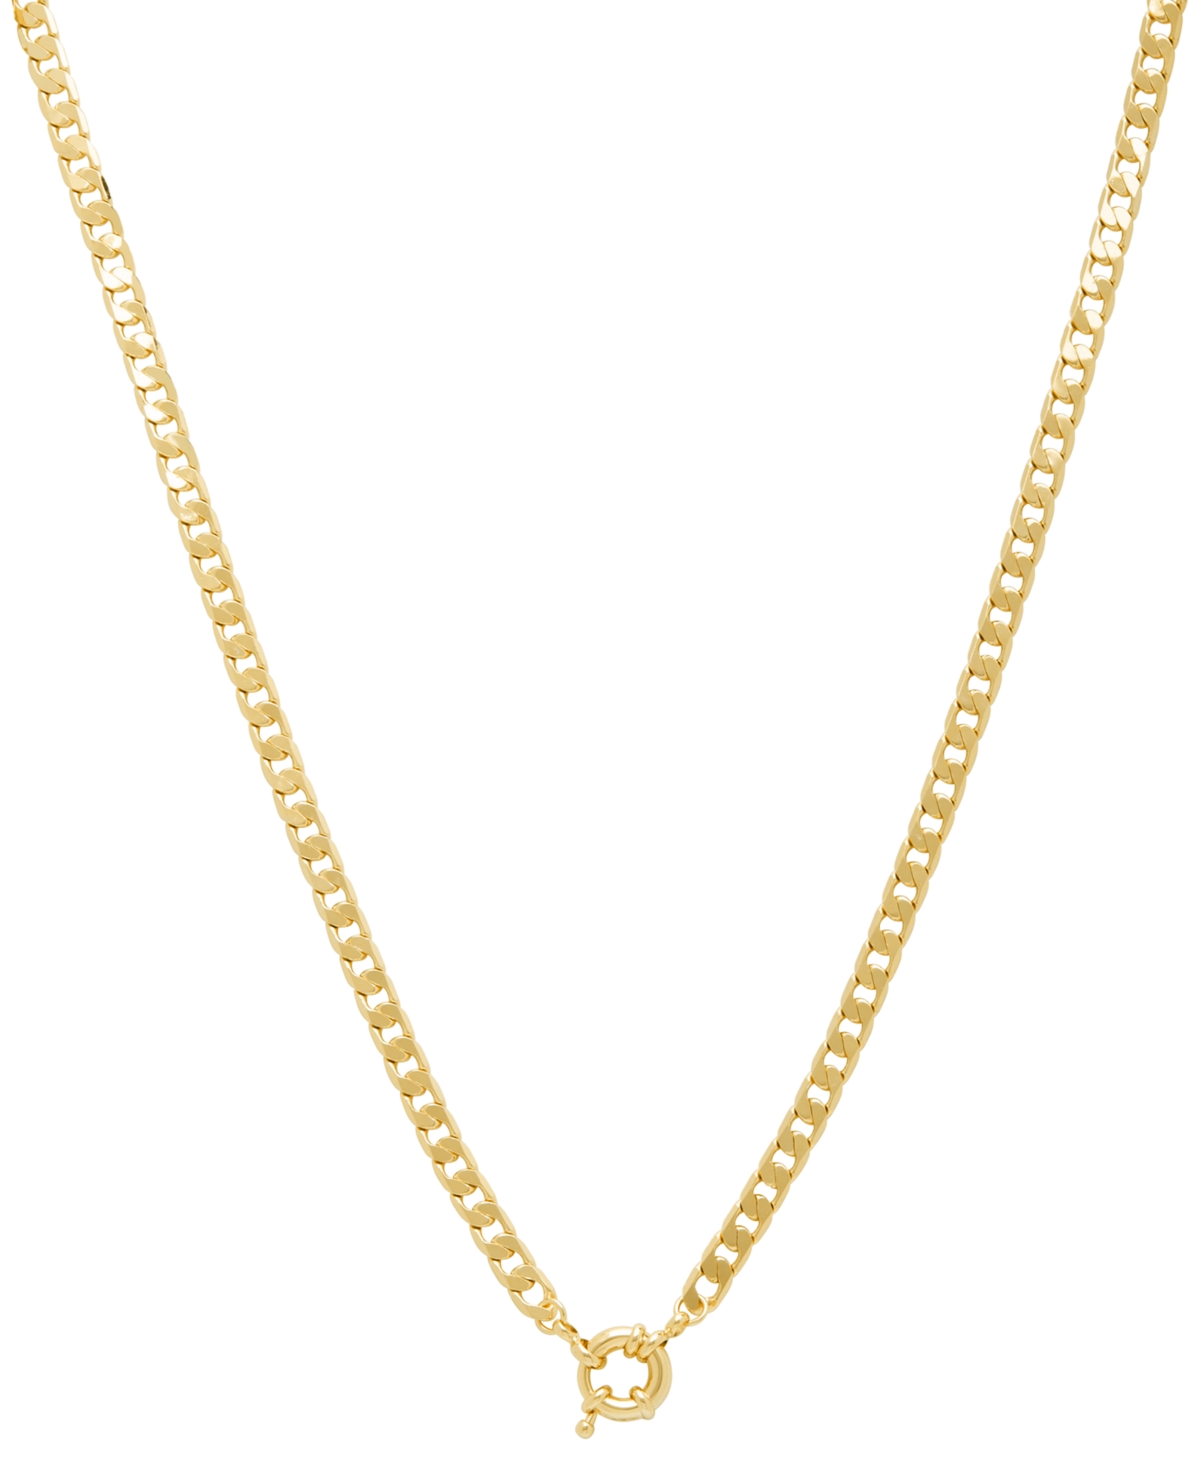 Women's Curb Chain Necklace 18" + 2" extender - Gold Plated